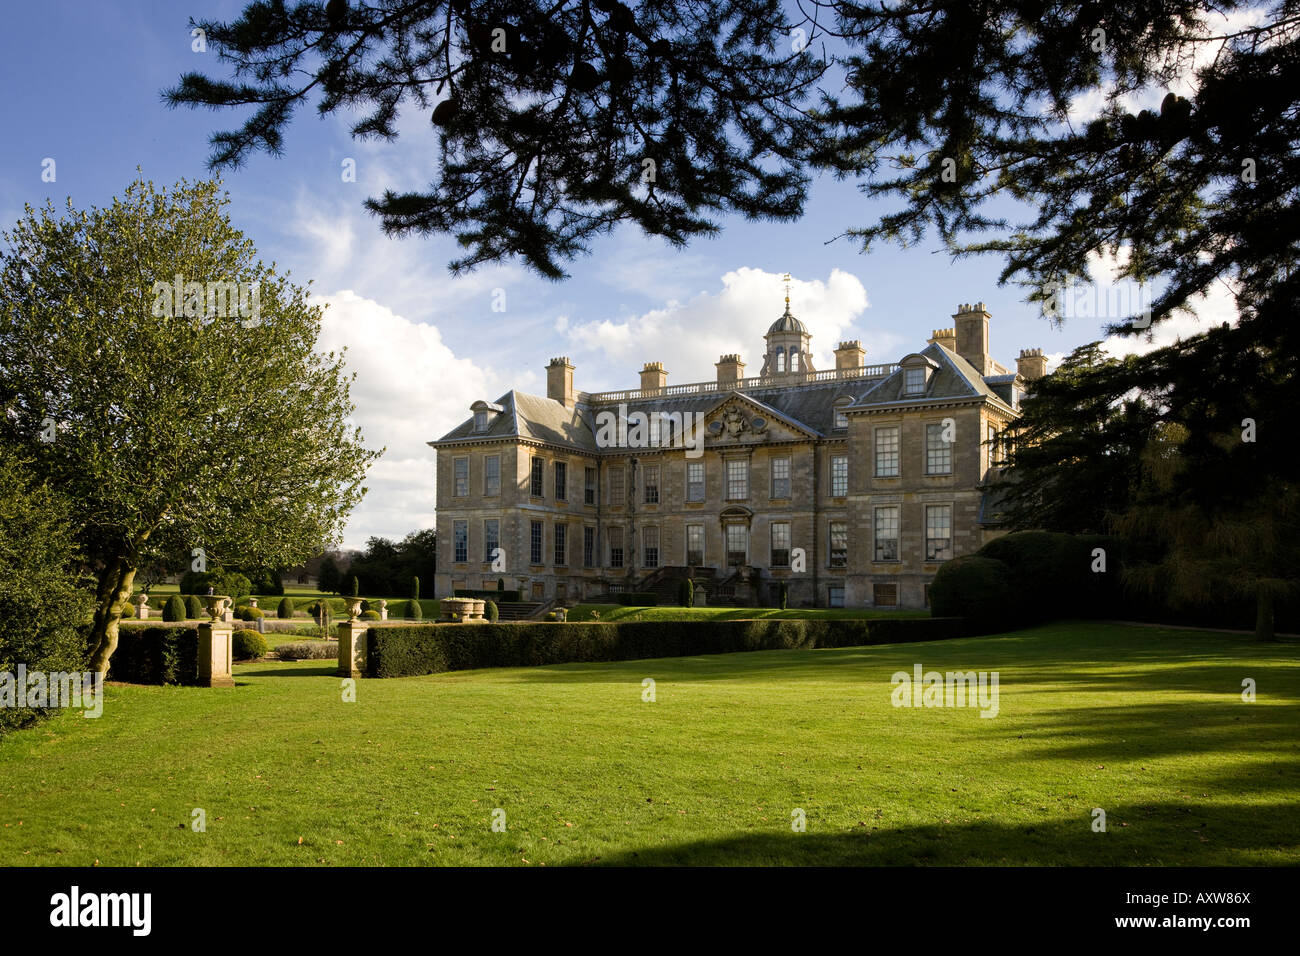 Belton House Grantham, Lincolnshire, Angleterre, Royaume-Uni Banque D'Images